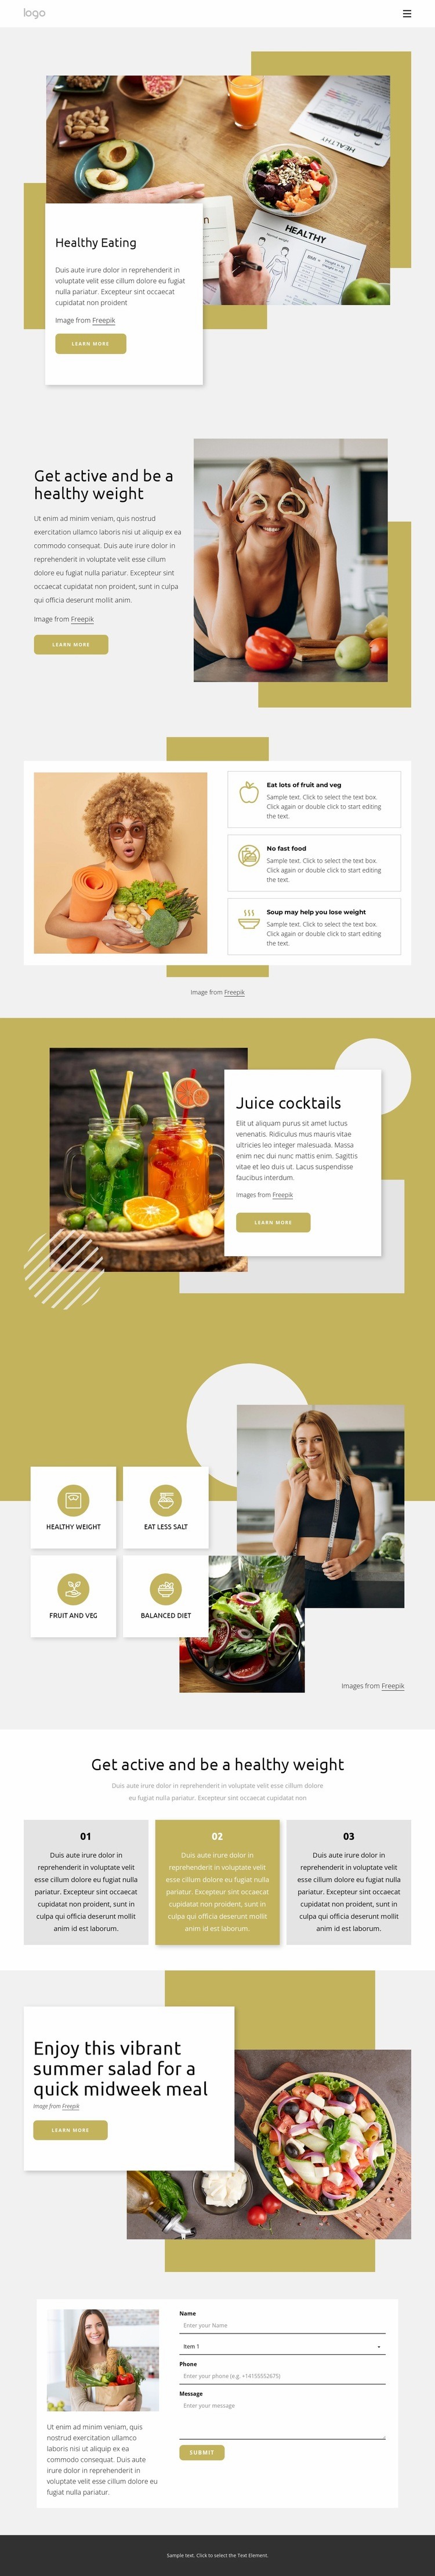 Focus on healthy eating Web Page Design